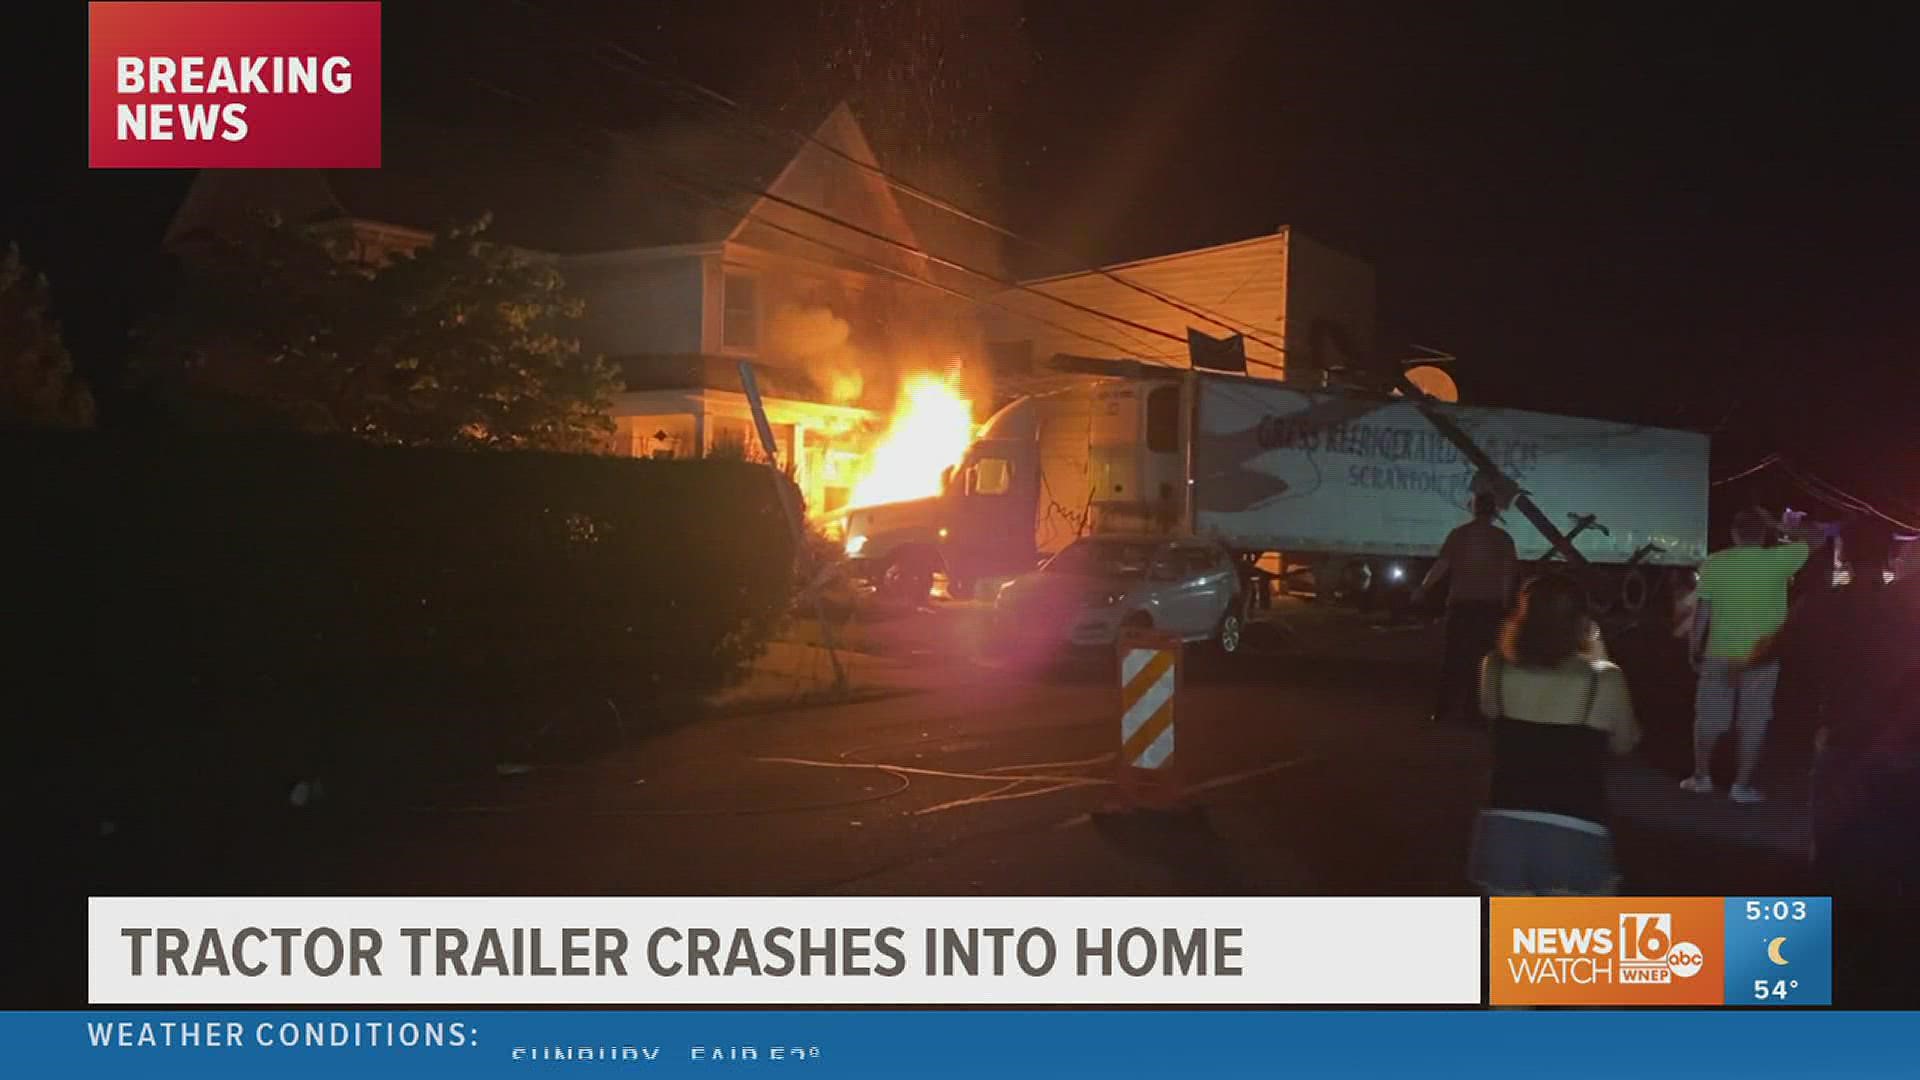 Two people were in the home at the time of the crash. They are ok. The driver of the tractor-trailer was taken to the hospital. There is no word on his injuries.